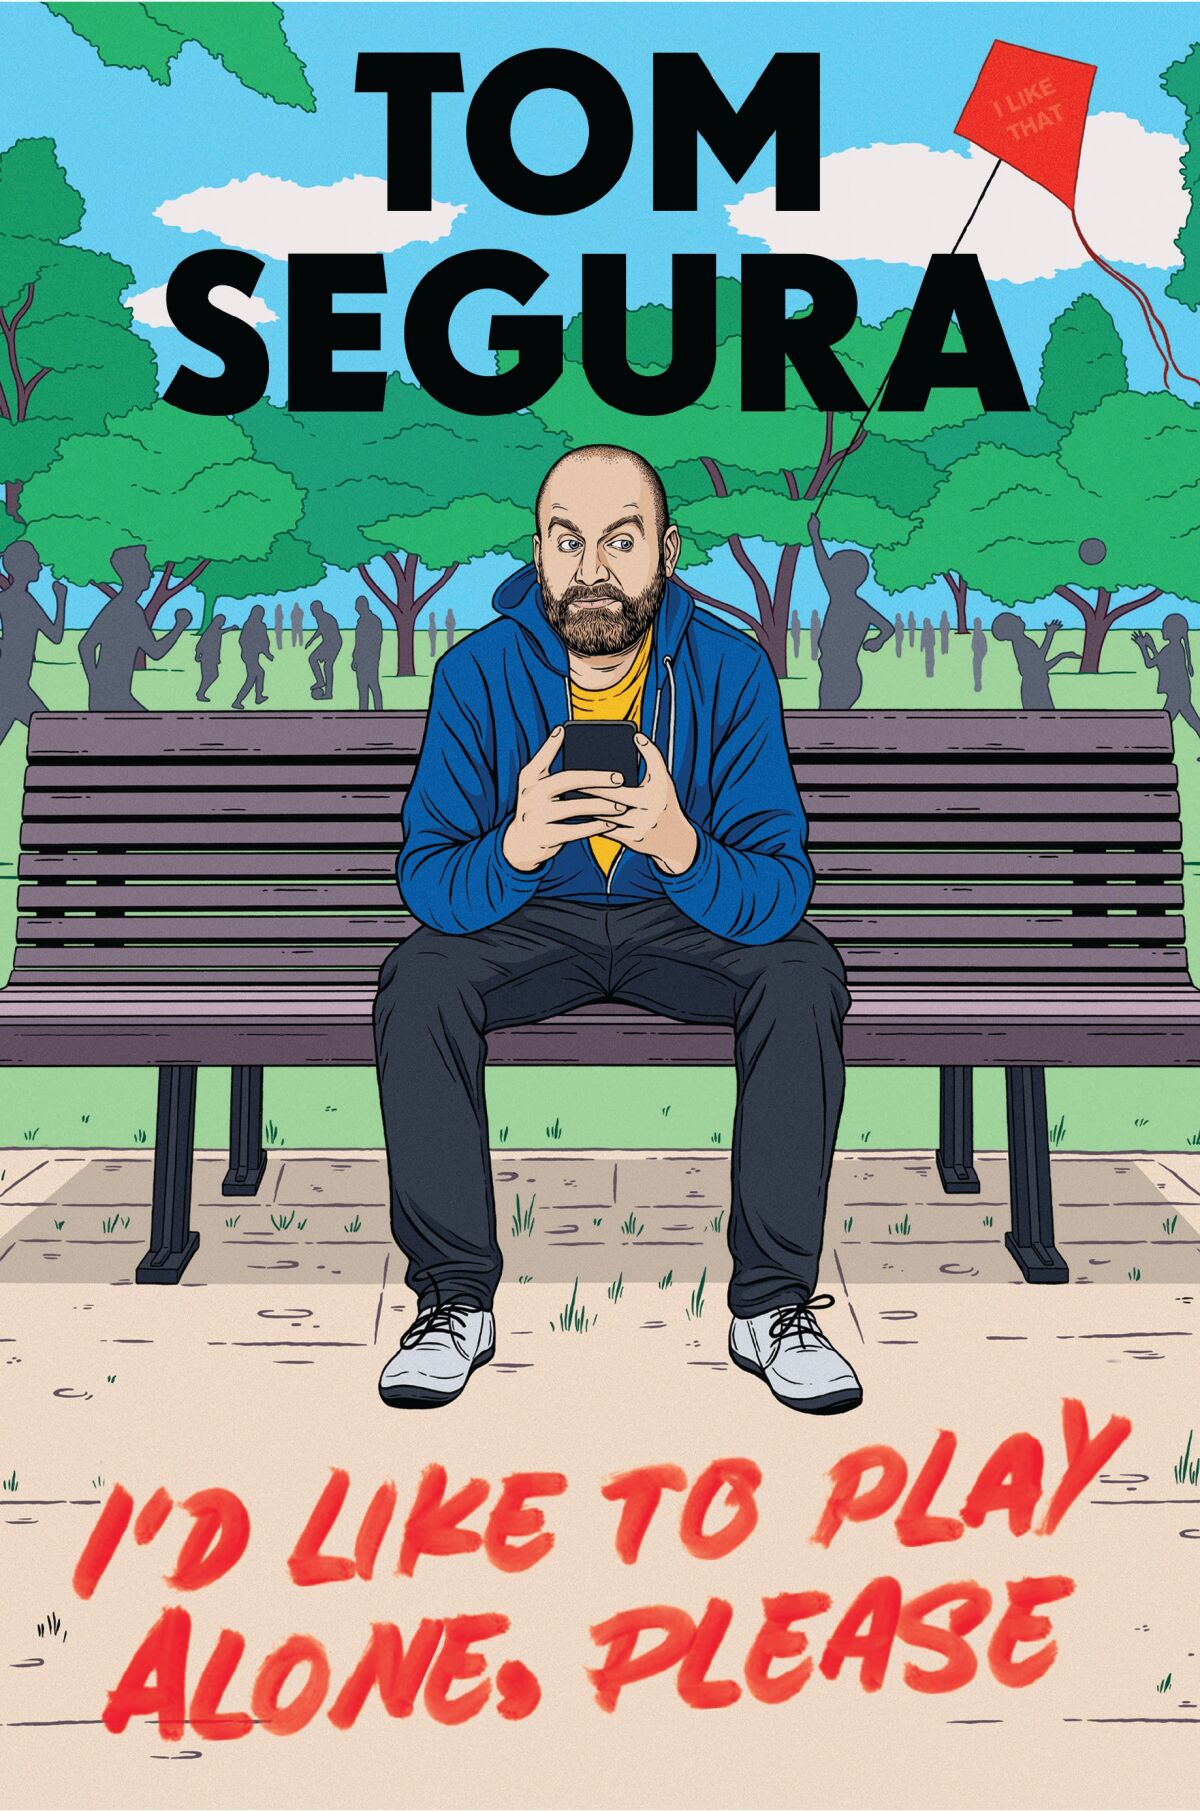 The cover of Segura's book "I'd Like to Play Alone, Please"